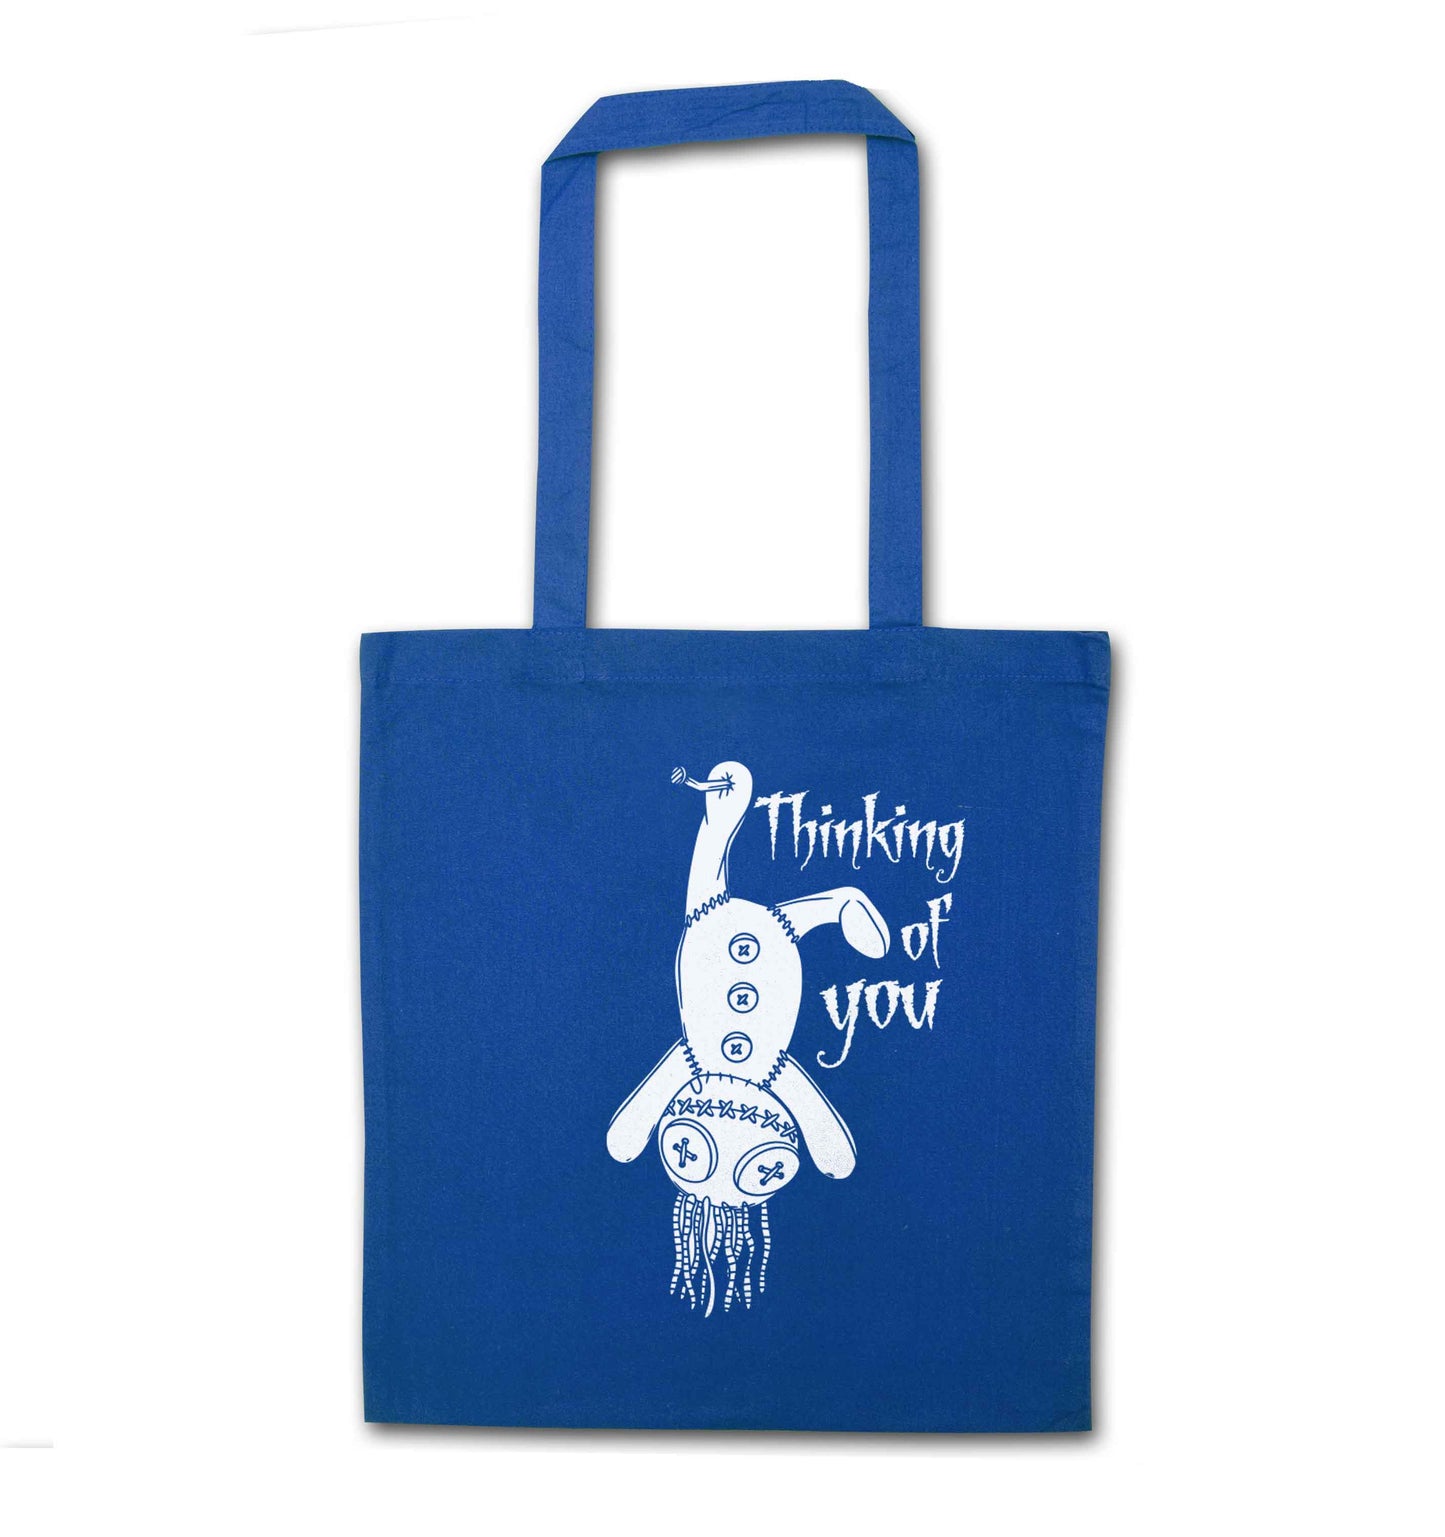 Thinking of you blue tote bag